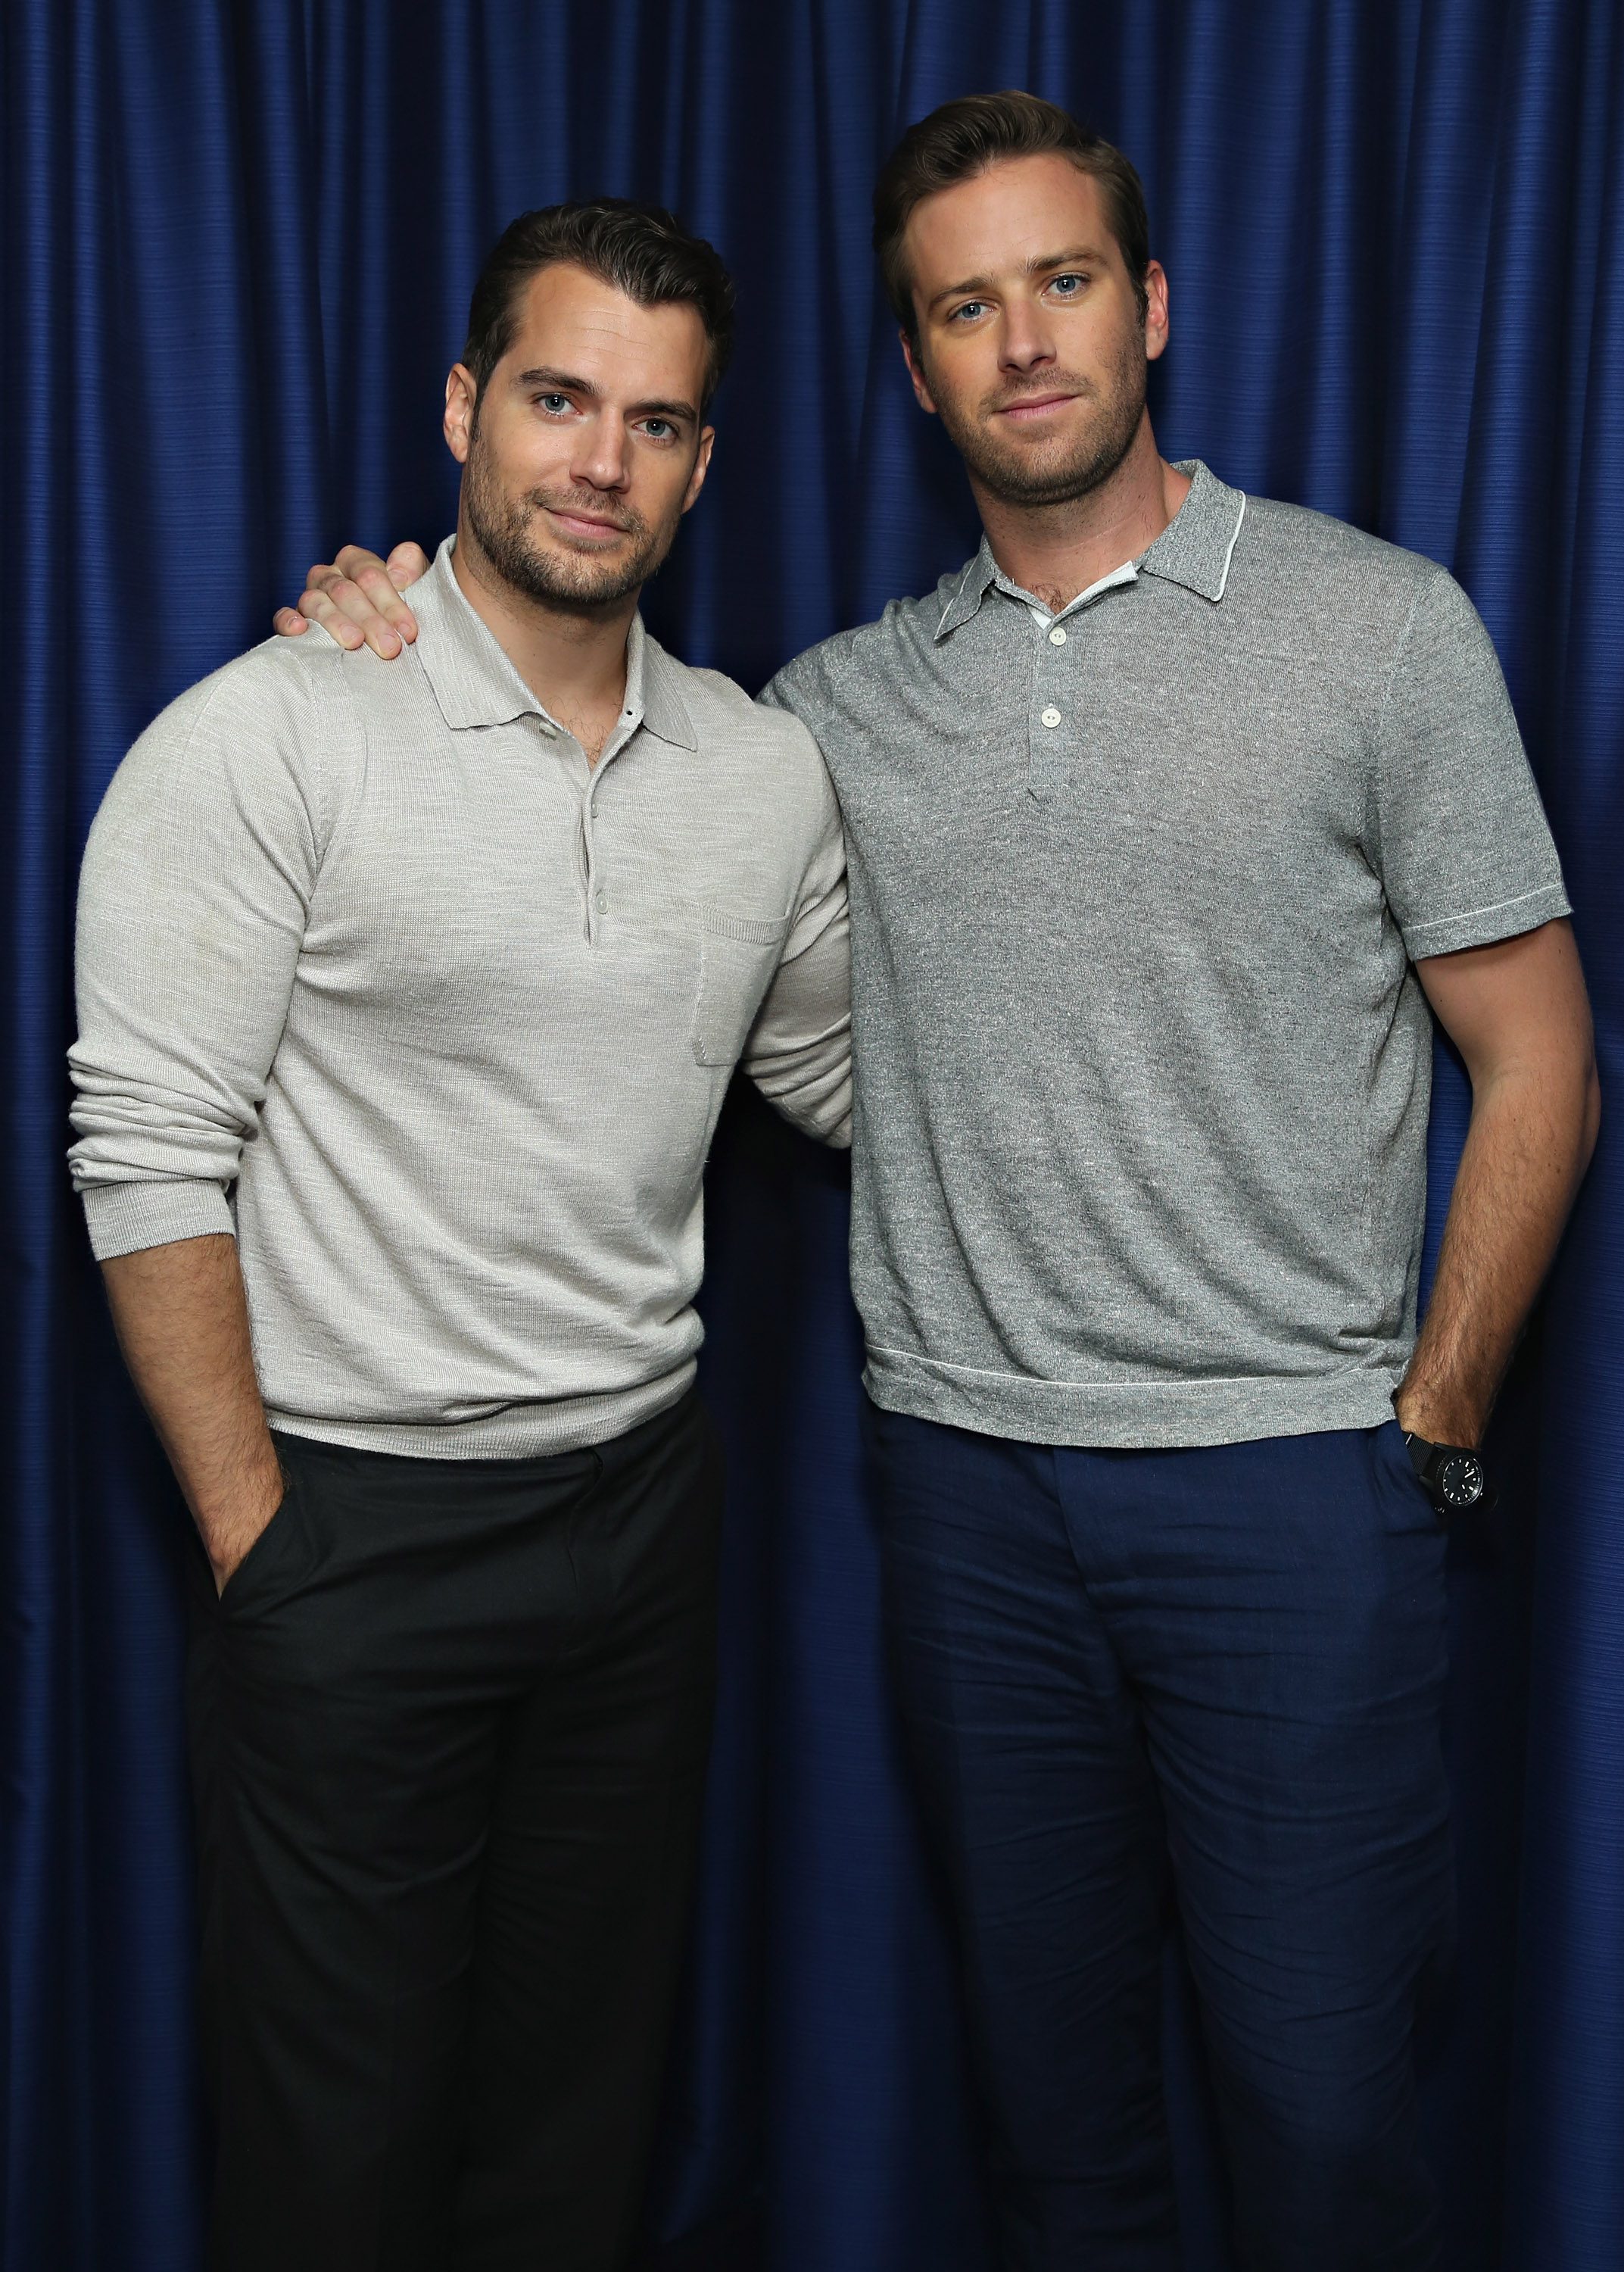 Henry Cavill and Armie Hammer pose for a photo during SiriusXM's Entertainment Weekly Radio on August 12, 2015, in New York City | Source: Getty Images